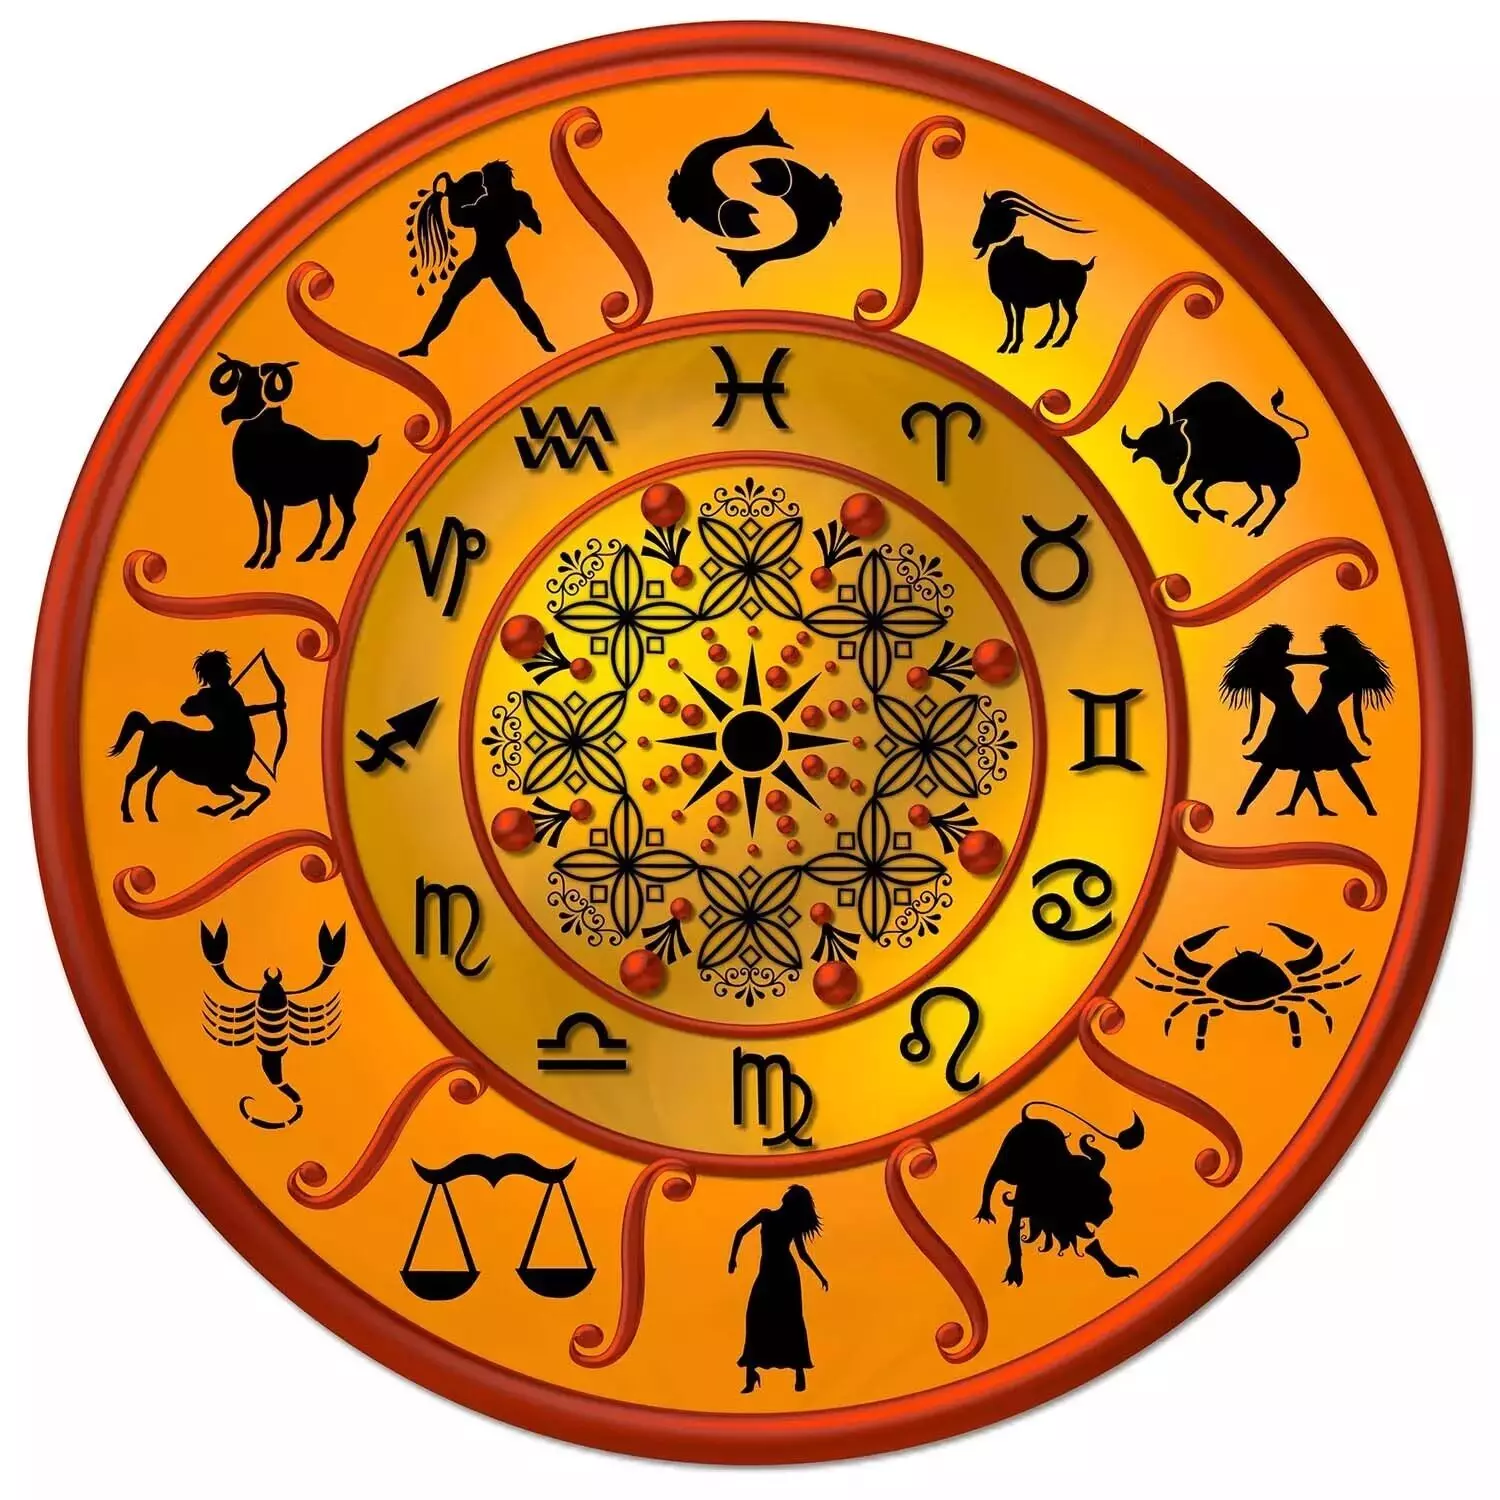 01  October  – Know your todays horoscope